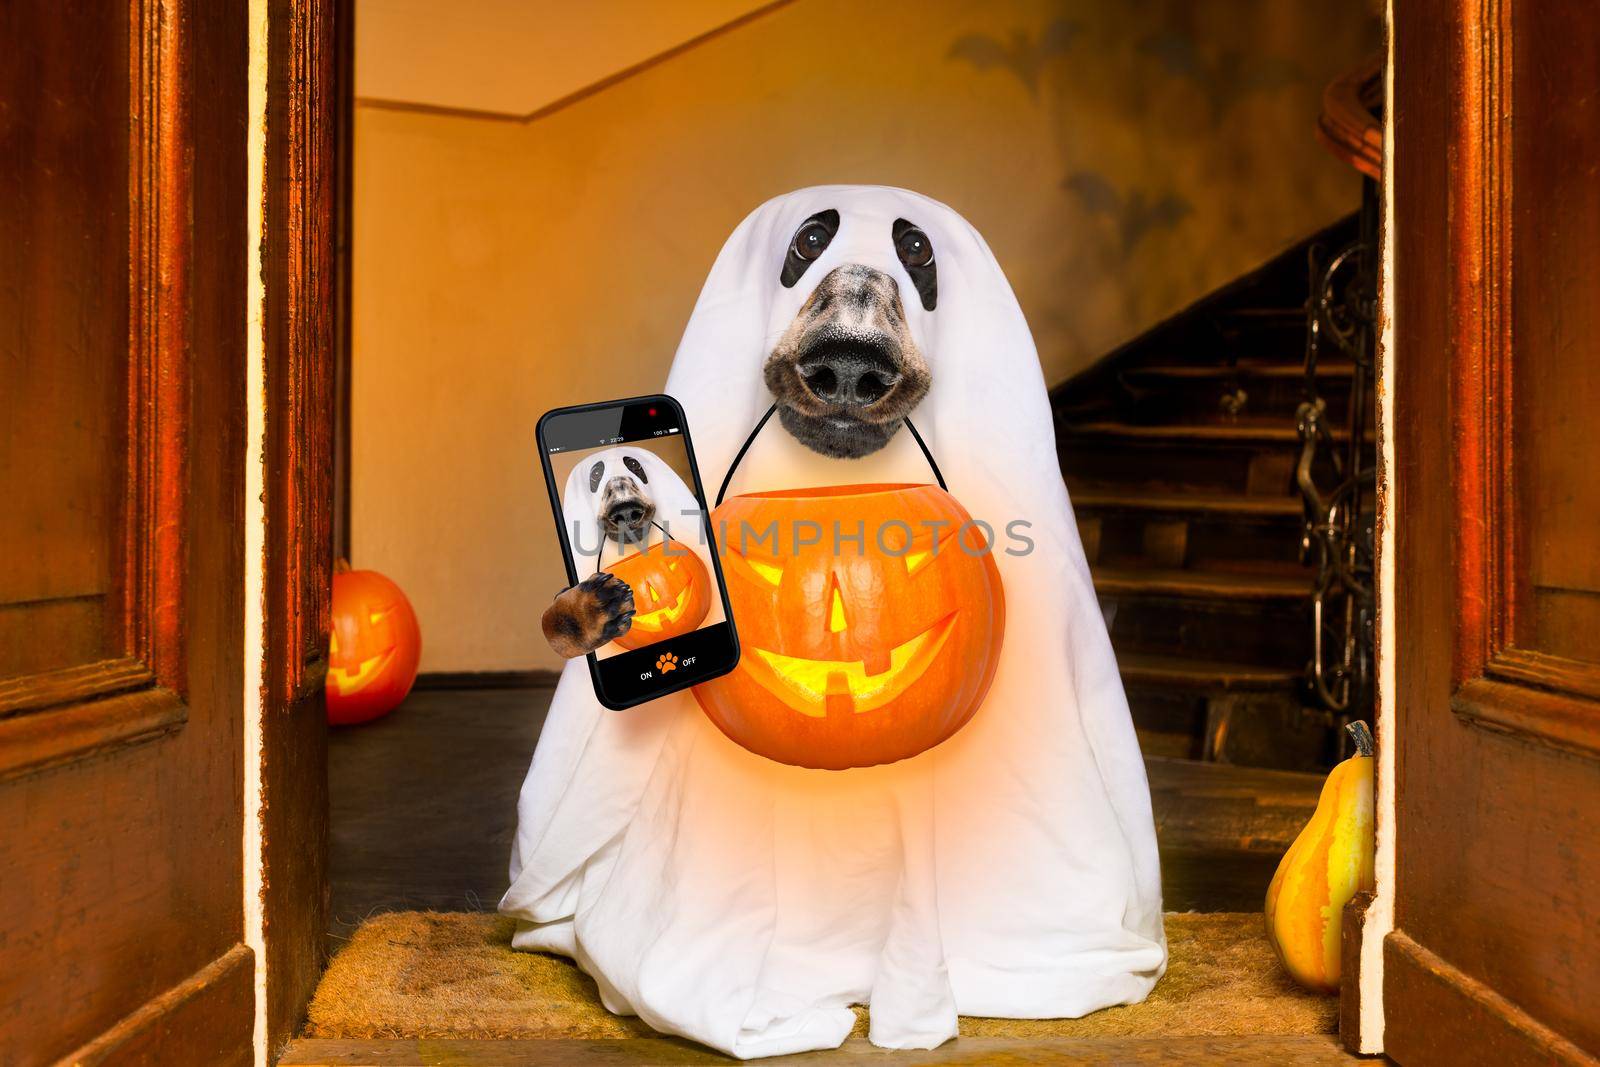 dog sit as a ghost for halloween in front of the door  at home entrance with pumpkin lantern or  light , scary and spooky taking  a selfie with smartphone